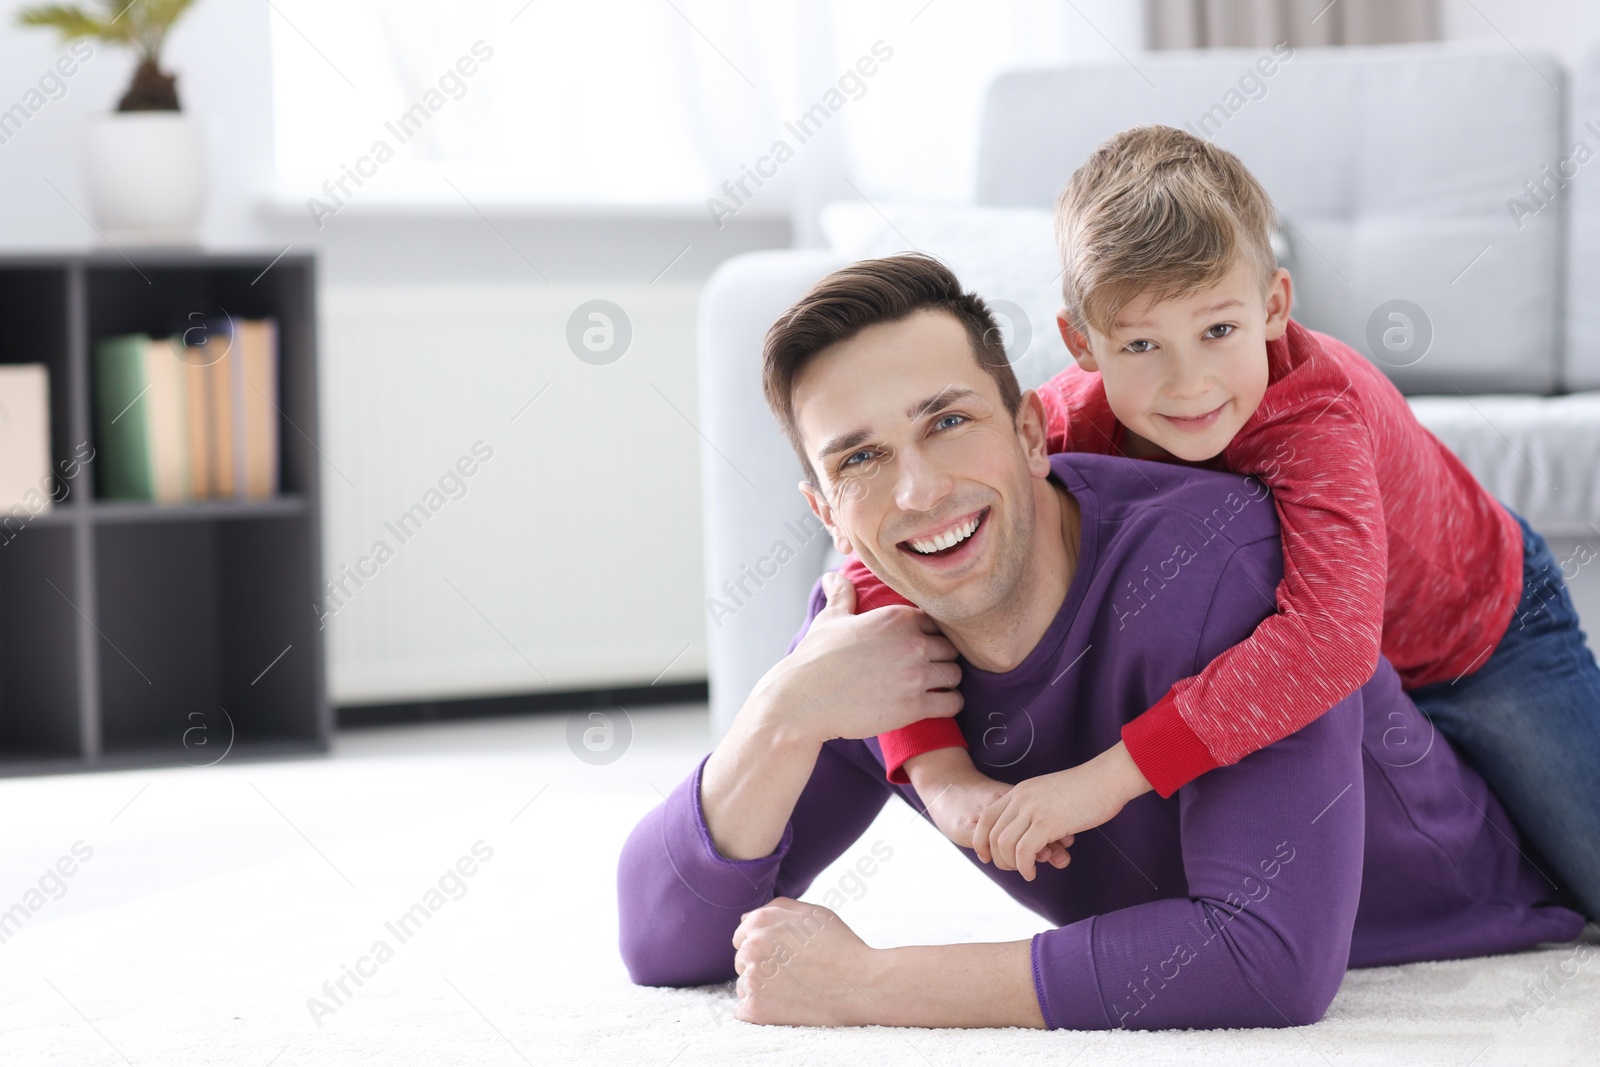 Photo of Son hugging his dad on floor at home